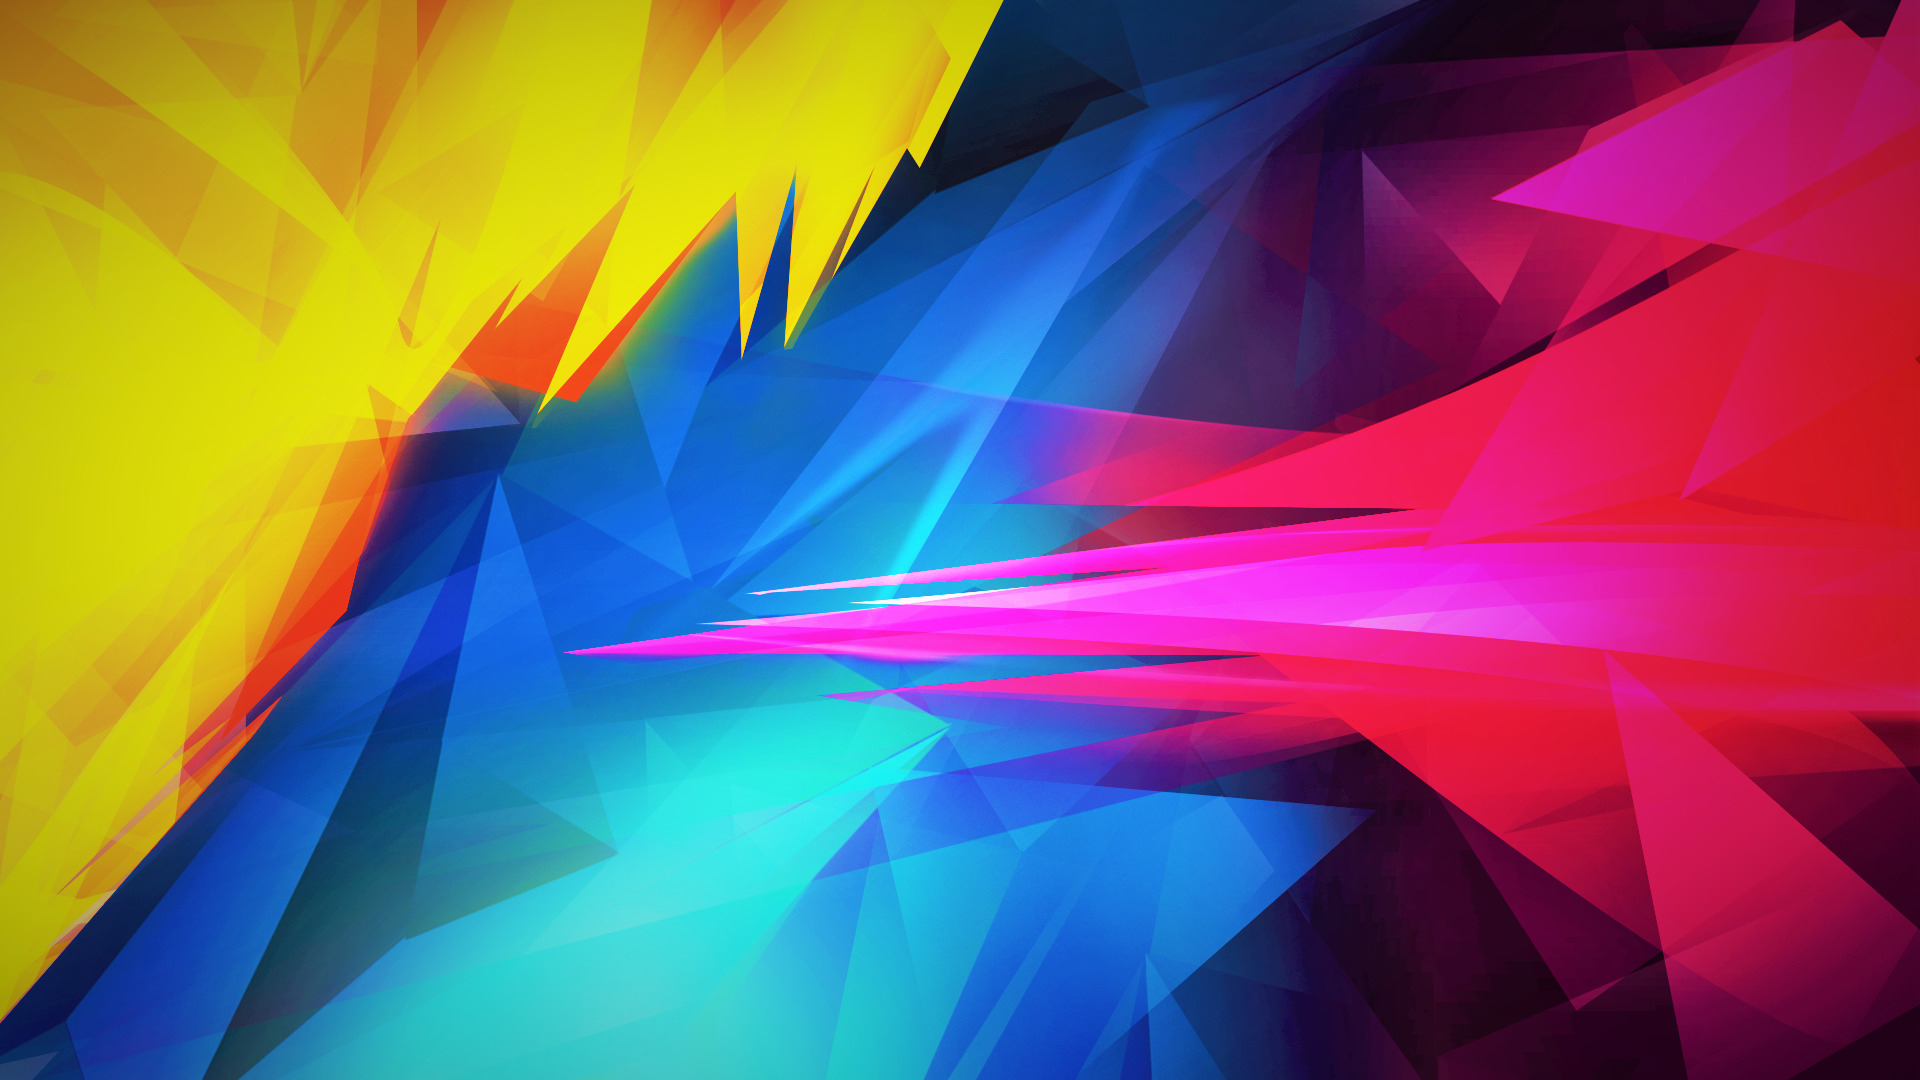 1920x1080 abstract, Blue, Yellow, Red, Pink, Purple, Orange, Colorful Wallpapers HD / Desktop and Mobile Backgrounds